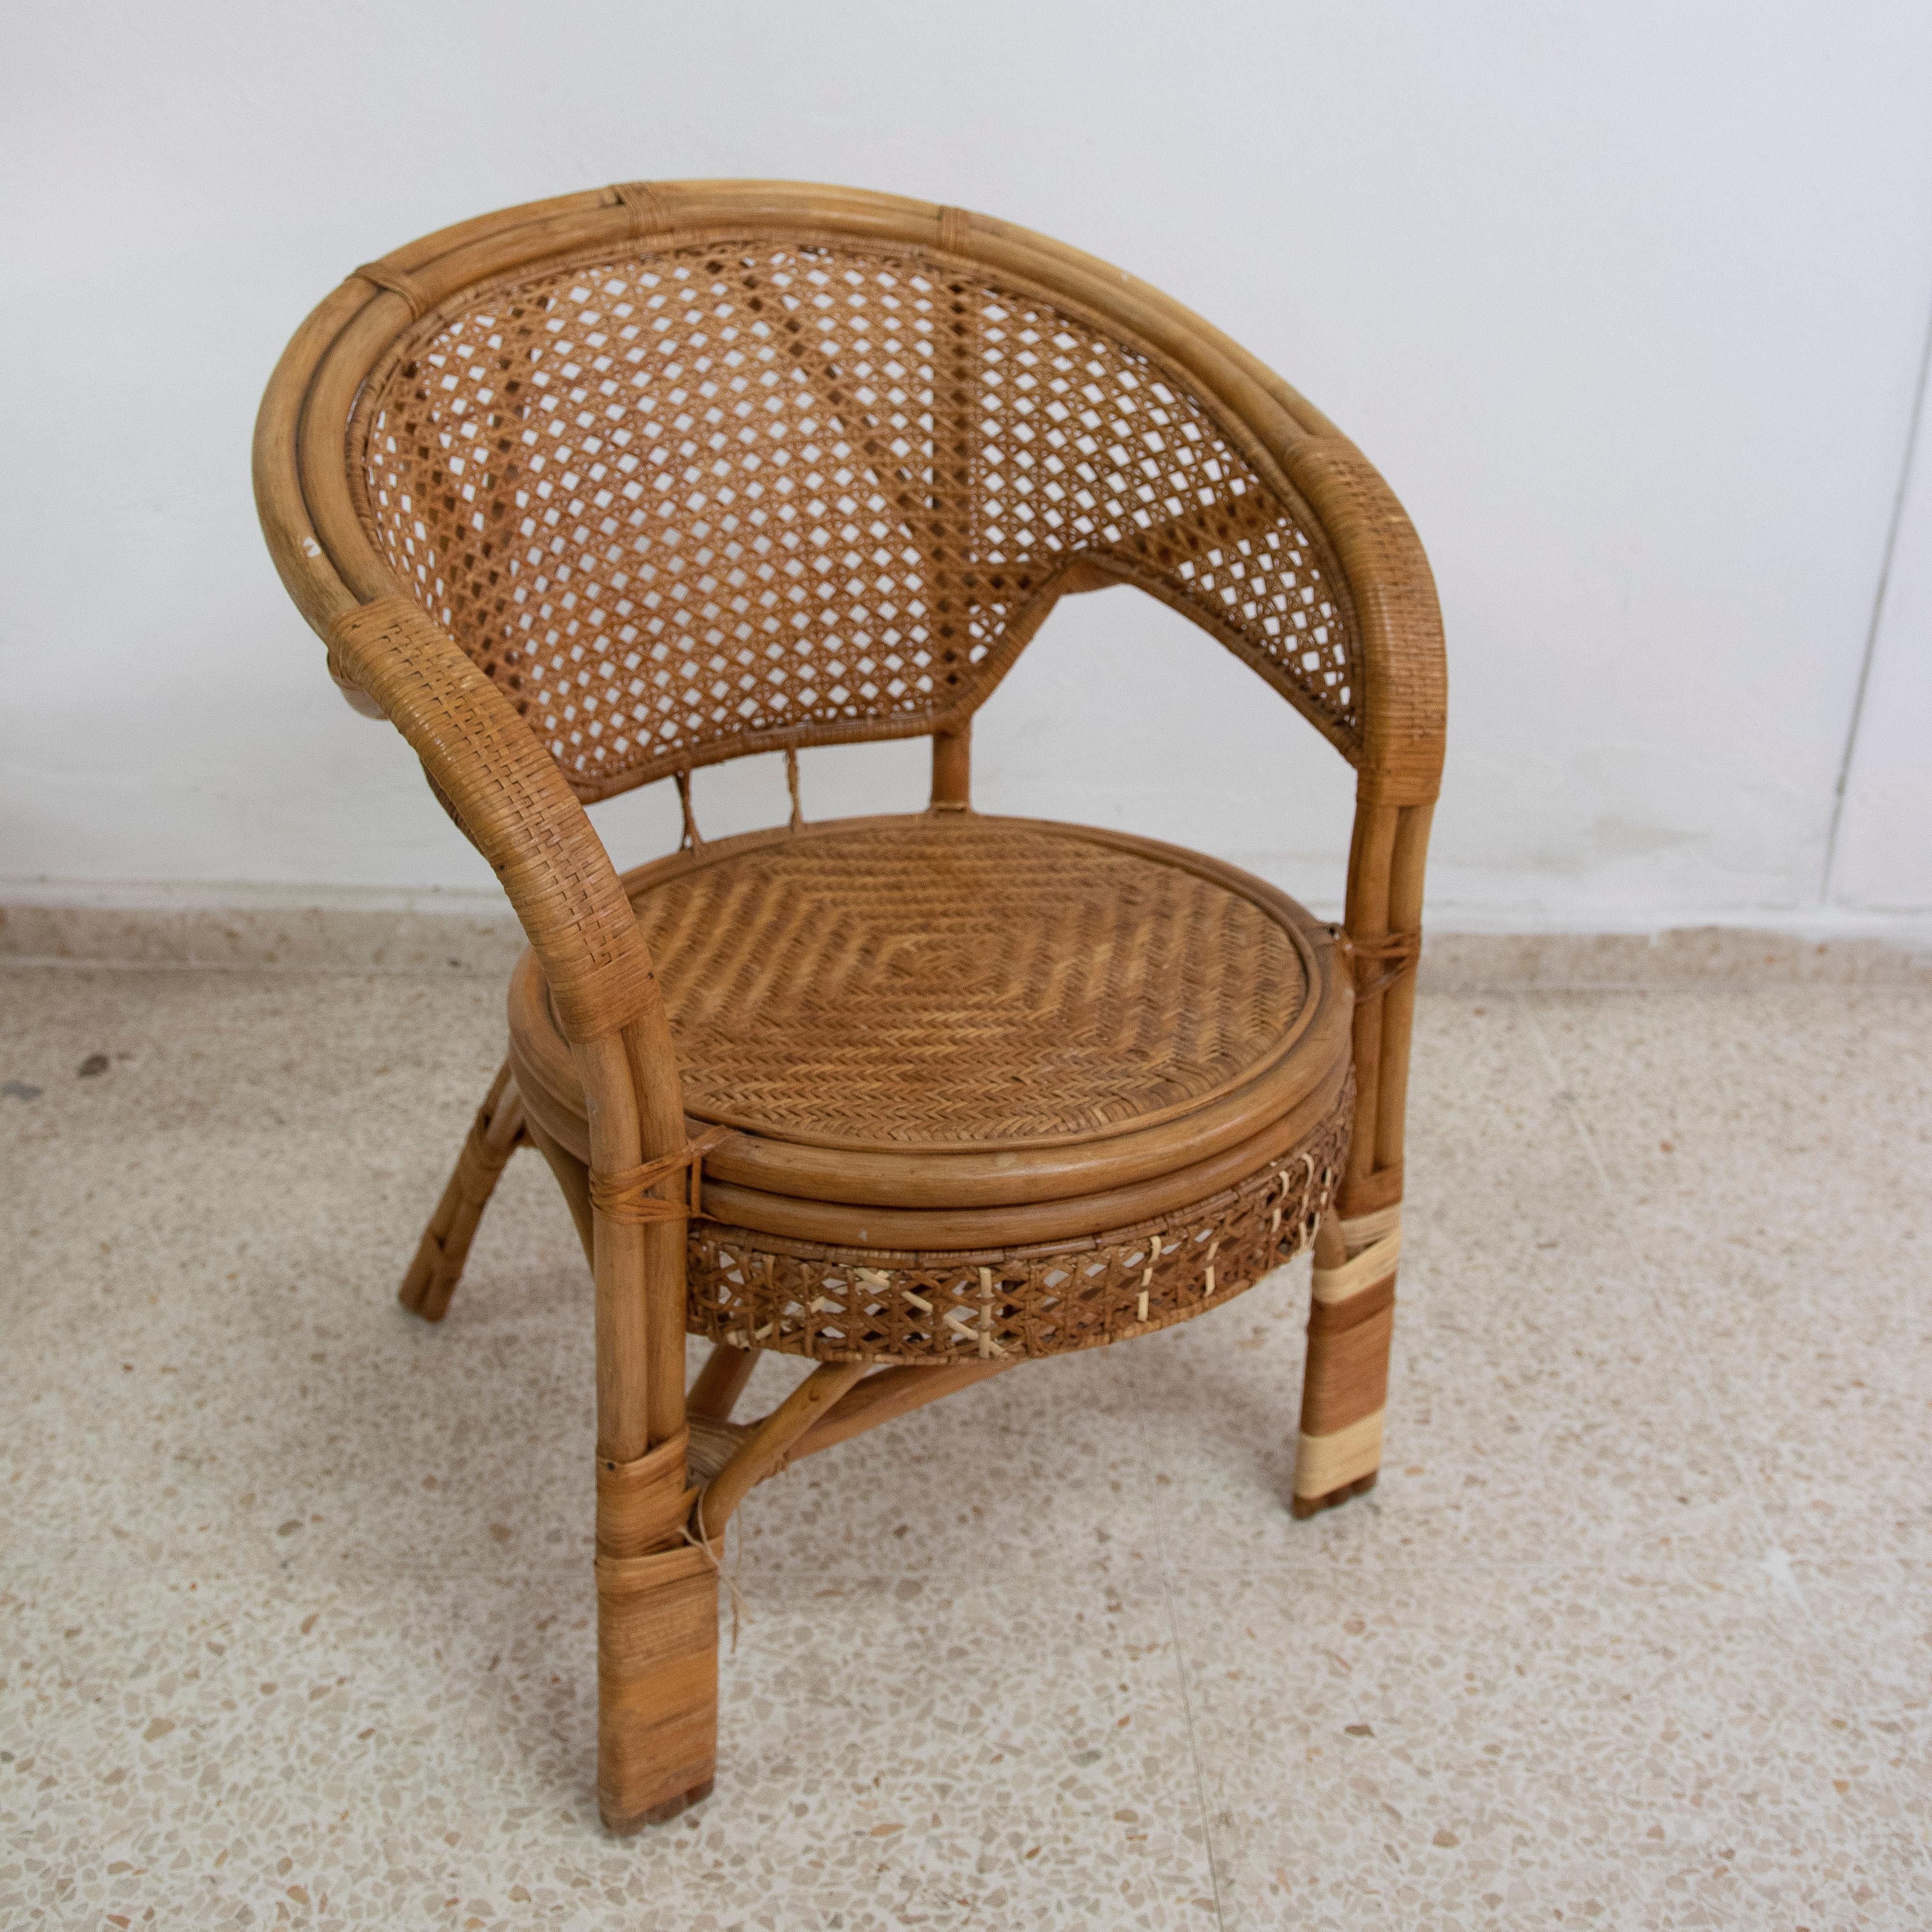 1950s Wicker and bamboo armchair with mesh backrest.